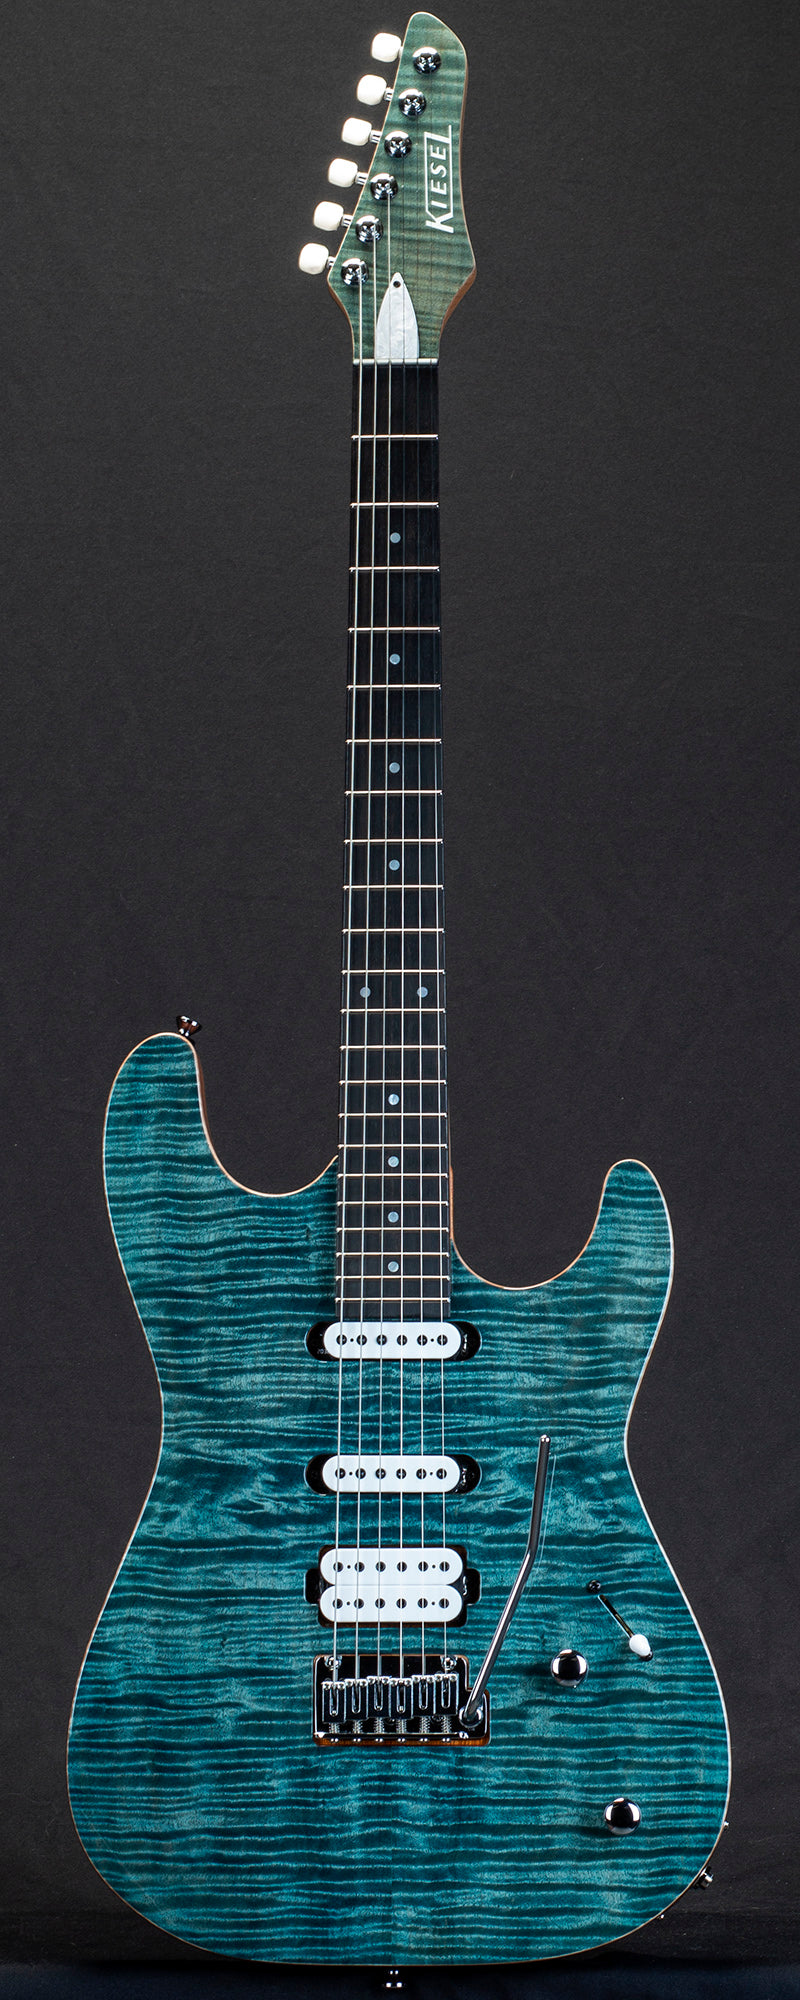 kiesel guitars theos gotoh tremolo T6G, mahogany body, flamed maple top, gloss top coat, rear of body natural clear RNC, inline gt headstock, painted headstock, 5-piece maple neck w/ 2 walnut stripes, tung oil neck, ebony fingerboard, 12" fingerboard radius, mother of pearl dot inlays, chrome hardware, white logo, HSS, m12sd bridge pickup, lithium single coils, white pickup coils, white pearloid tuner buttons, serial number 145767